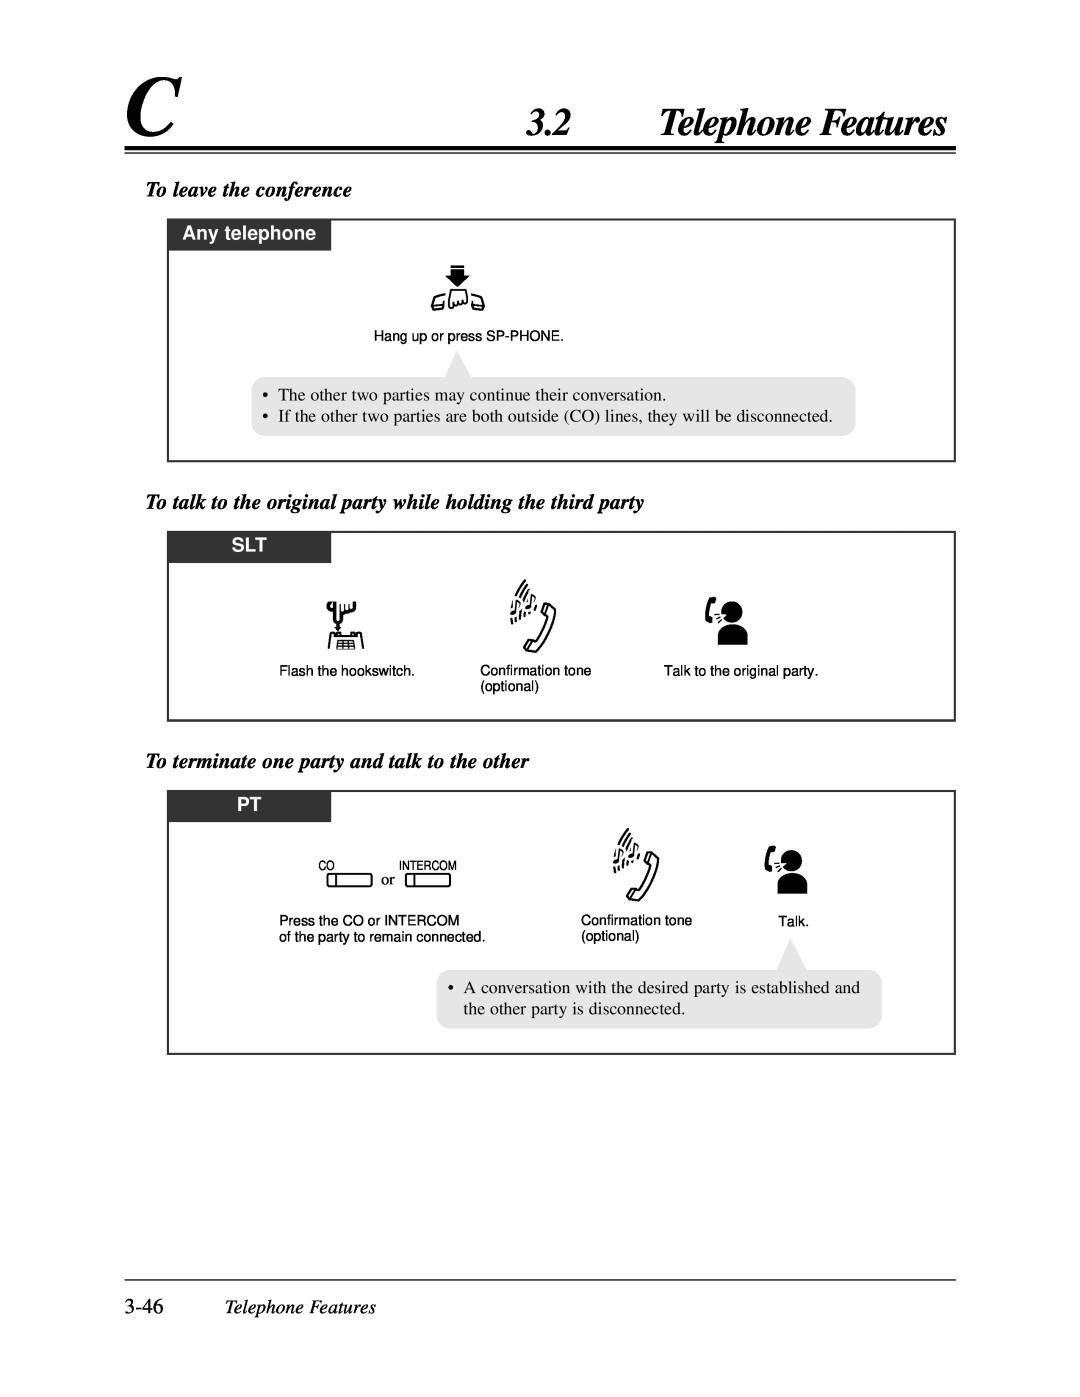 Panasonic KX-TA624 user manual To leave the conference, To terminate one party and talk to the other, 3.2Telephone Features 